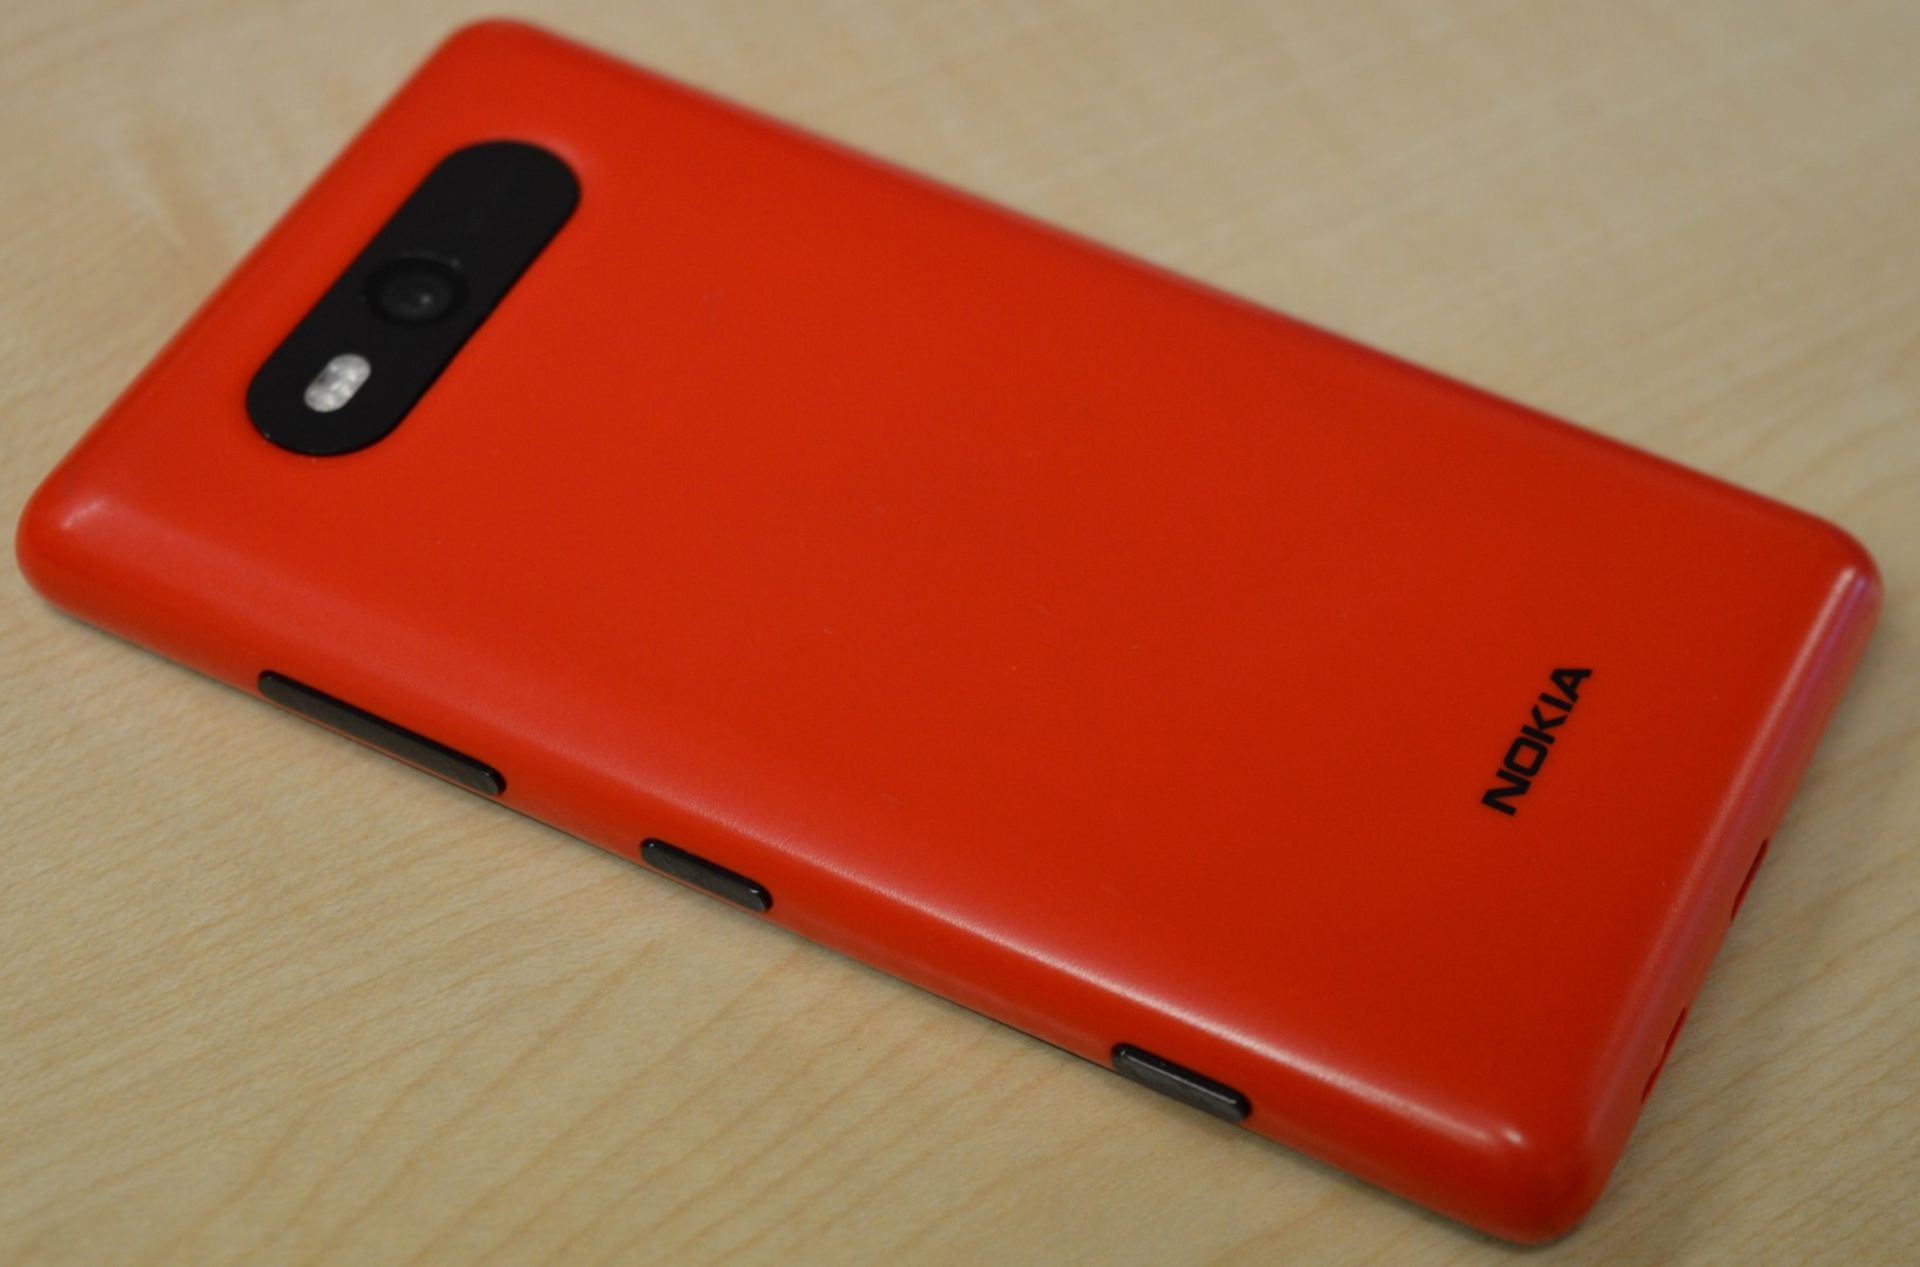 1 x Nokia 820 Mobile Phone - Red - Features Dual Core 1.5ghz Processor, 1gb System Ram, 8gb Internal - Image 5 of 5